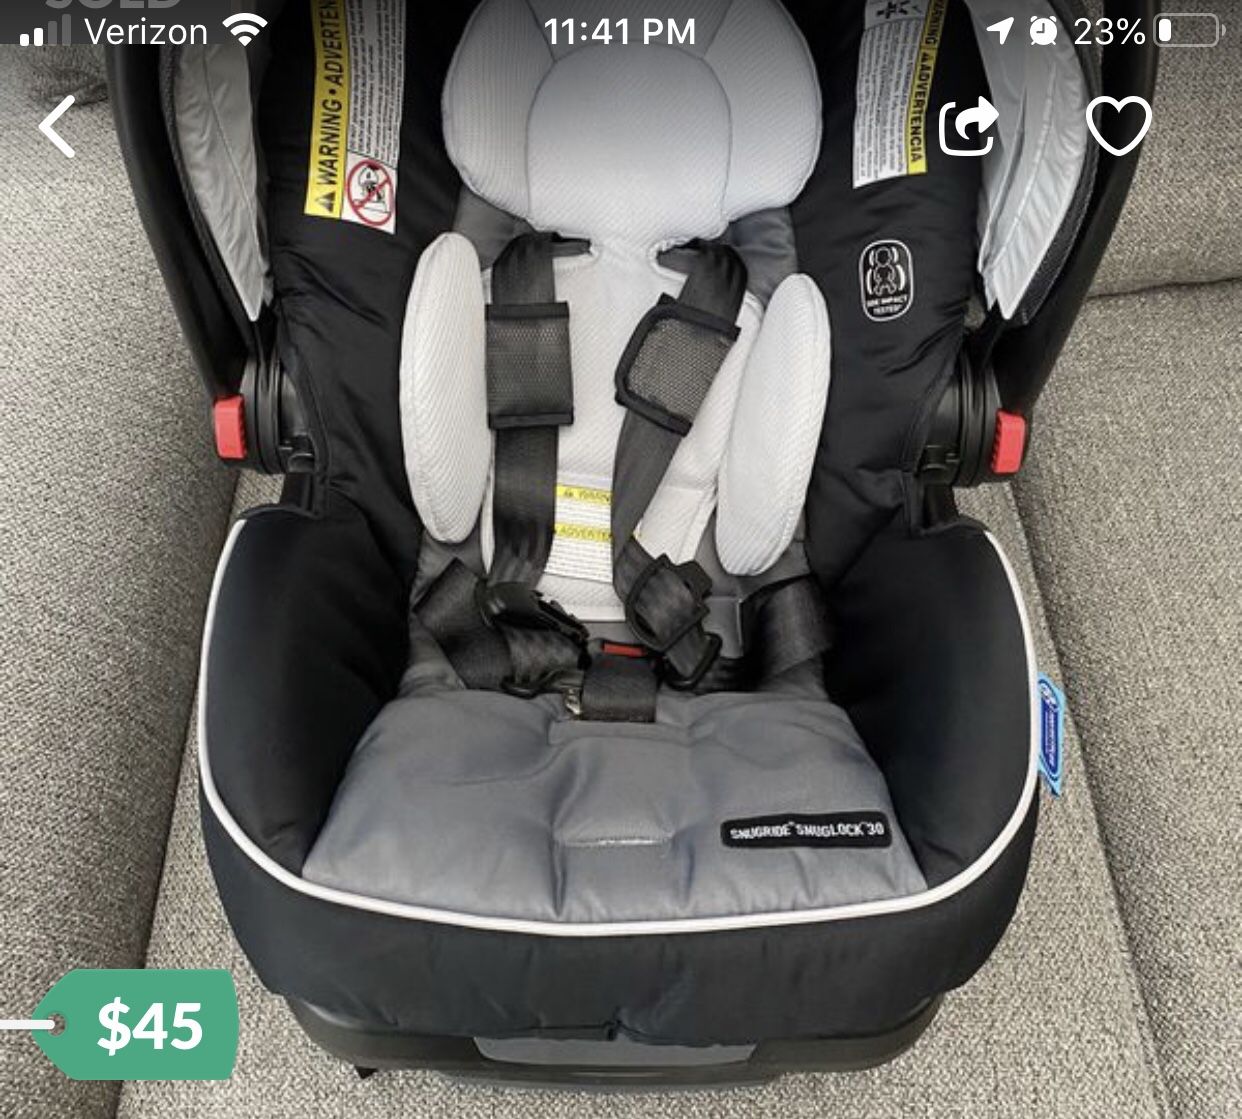 Car seat and stroller set $60